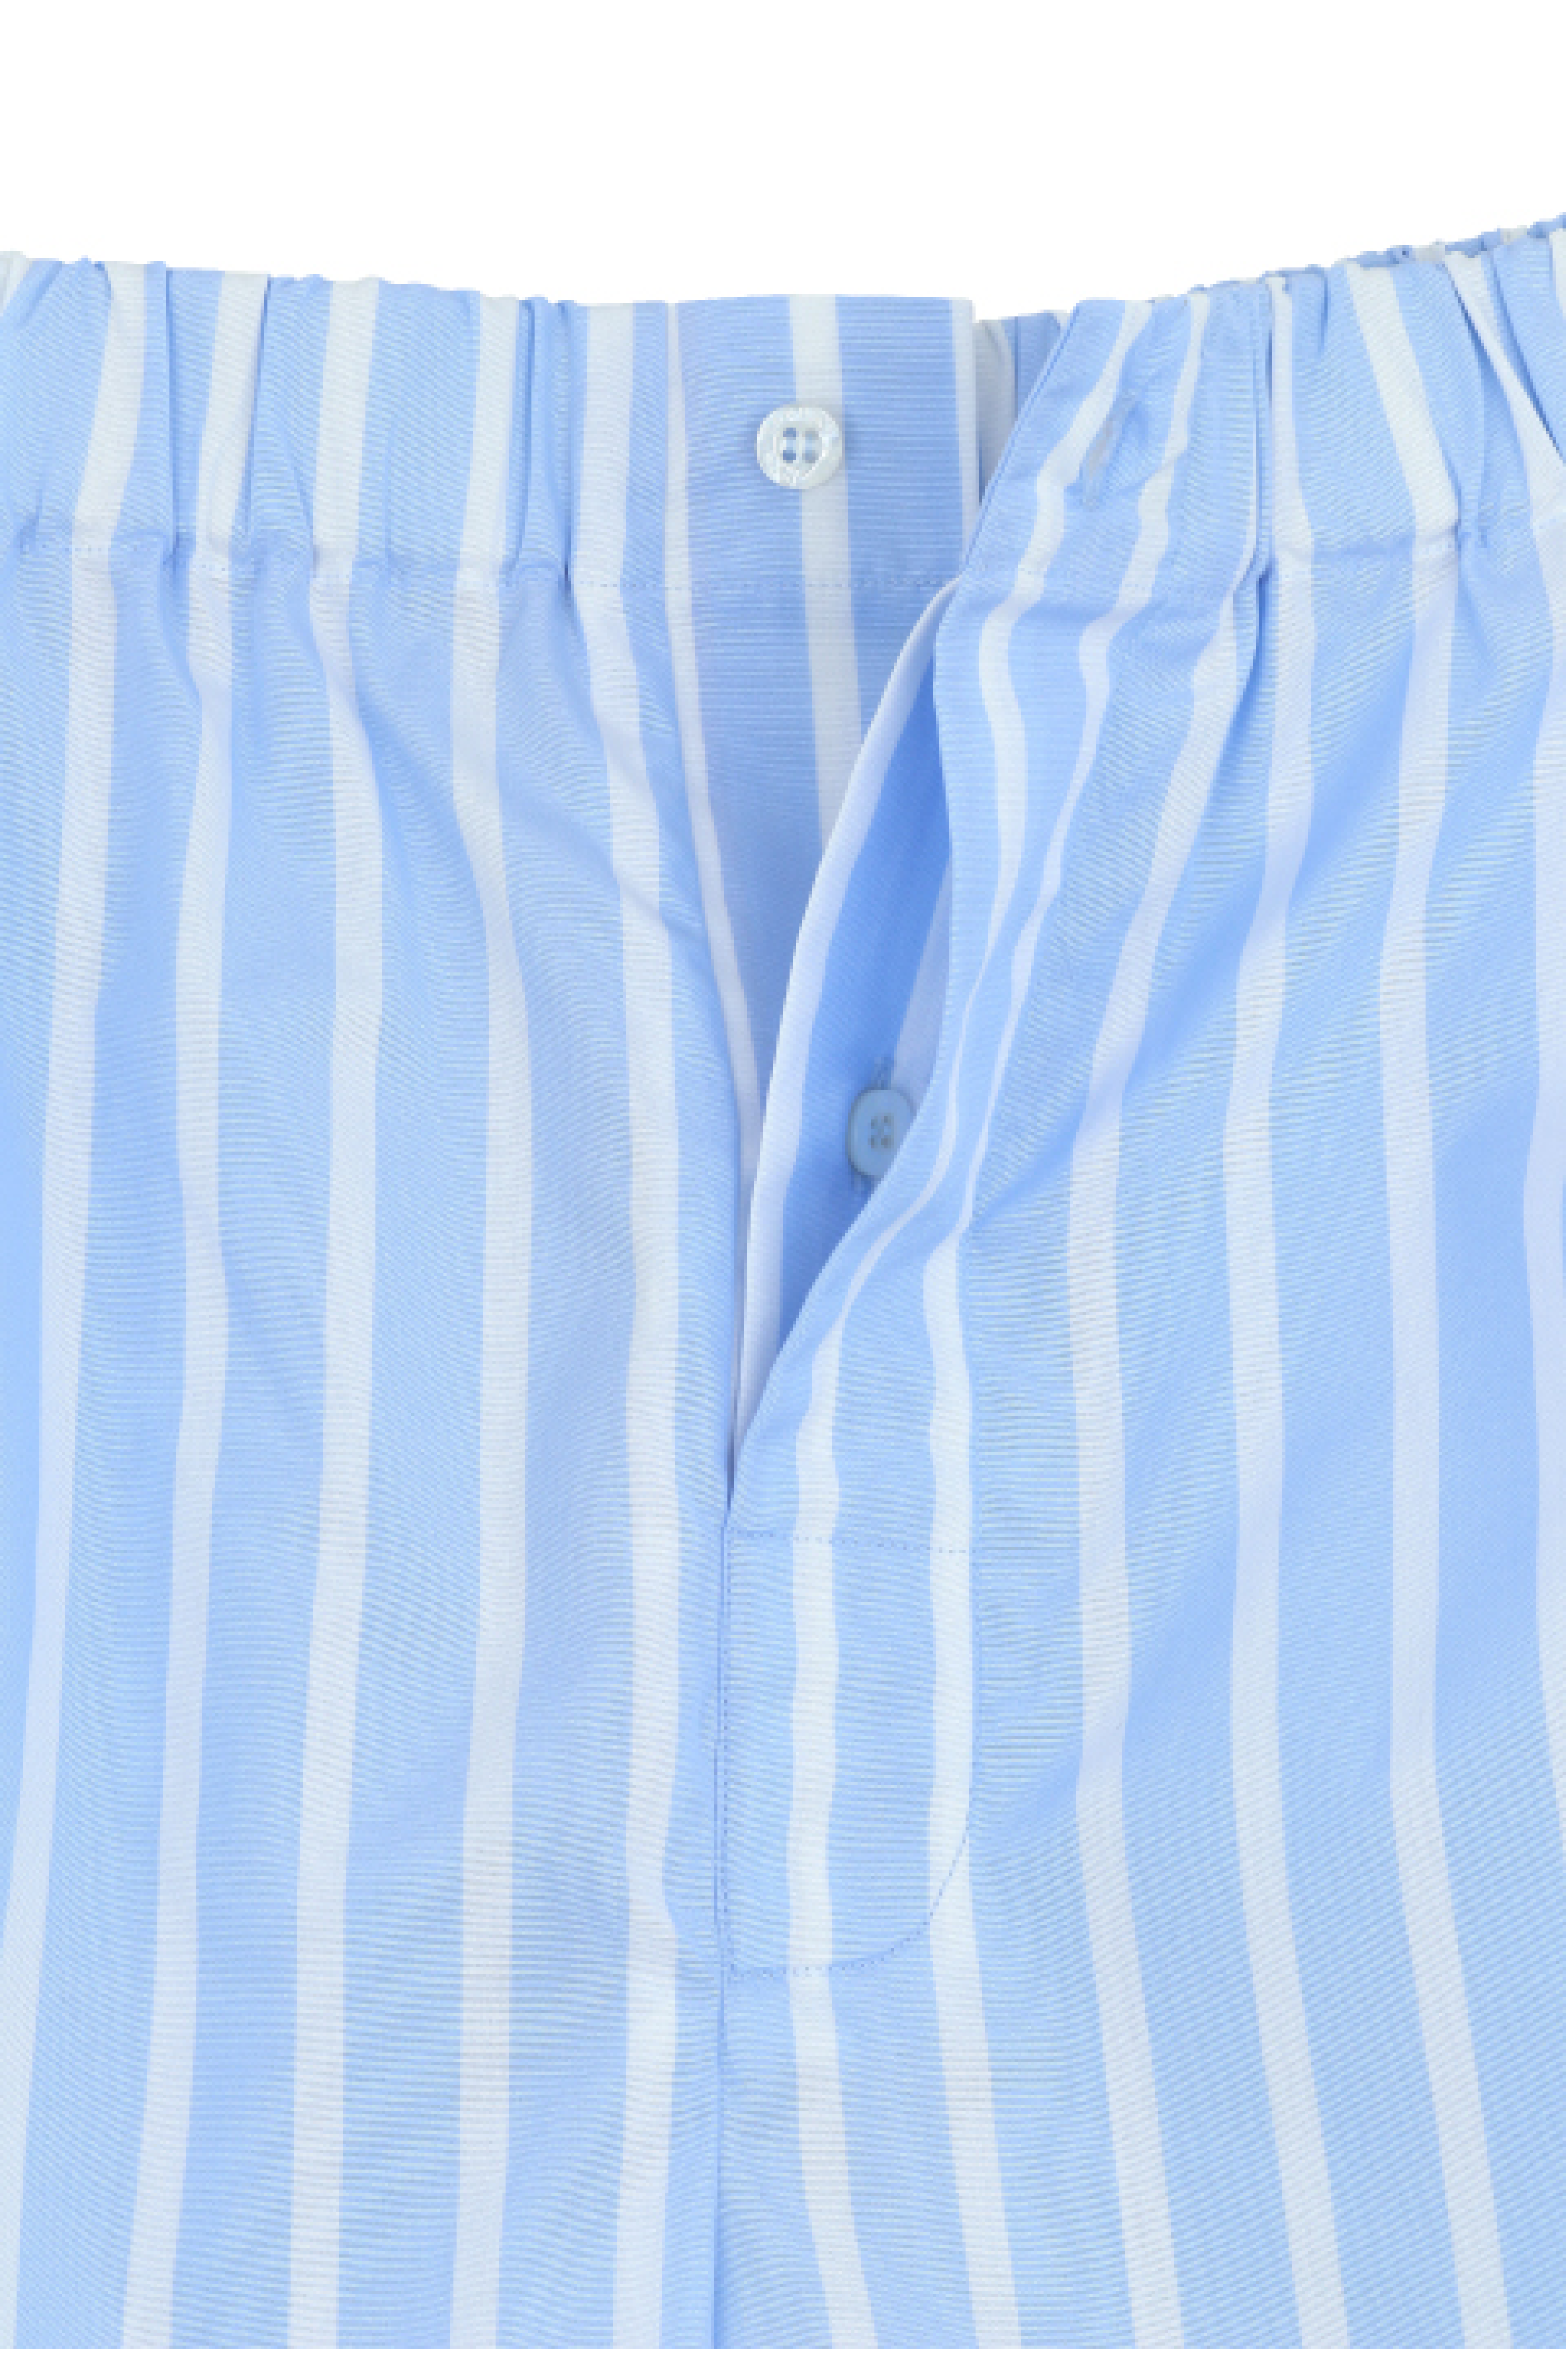 The Marcel in large blue and white striped